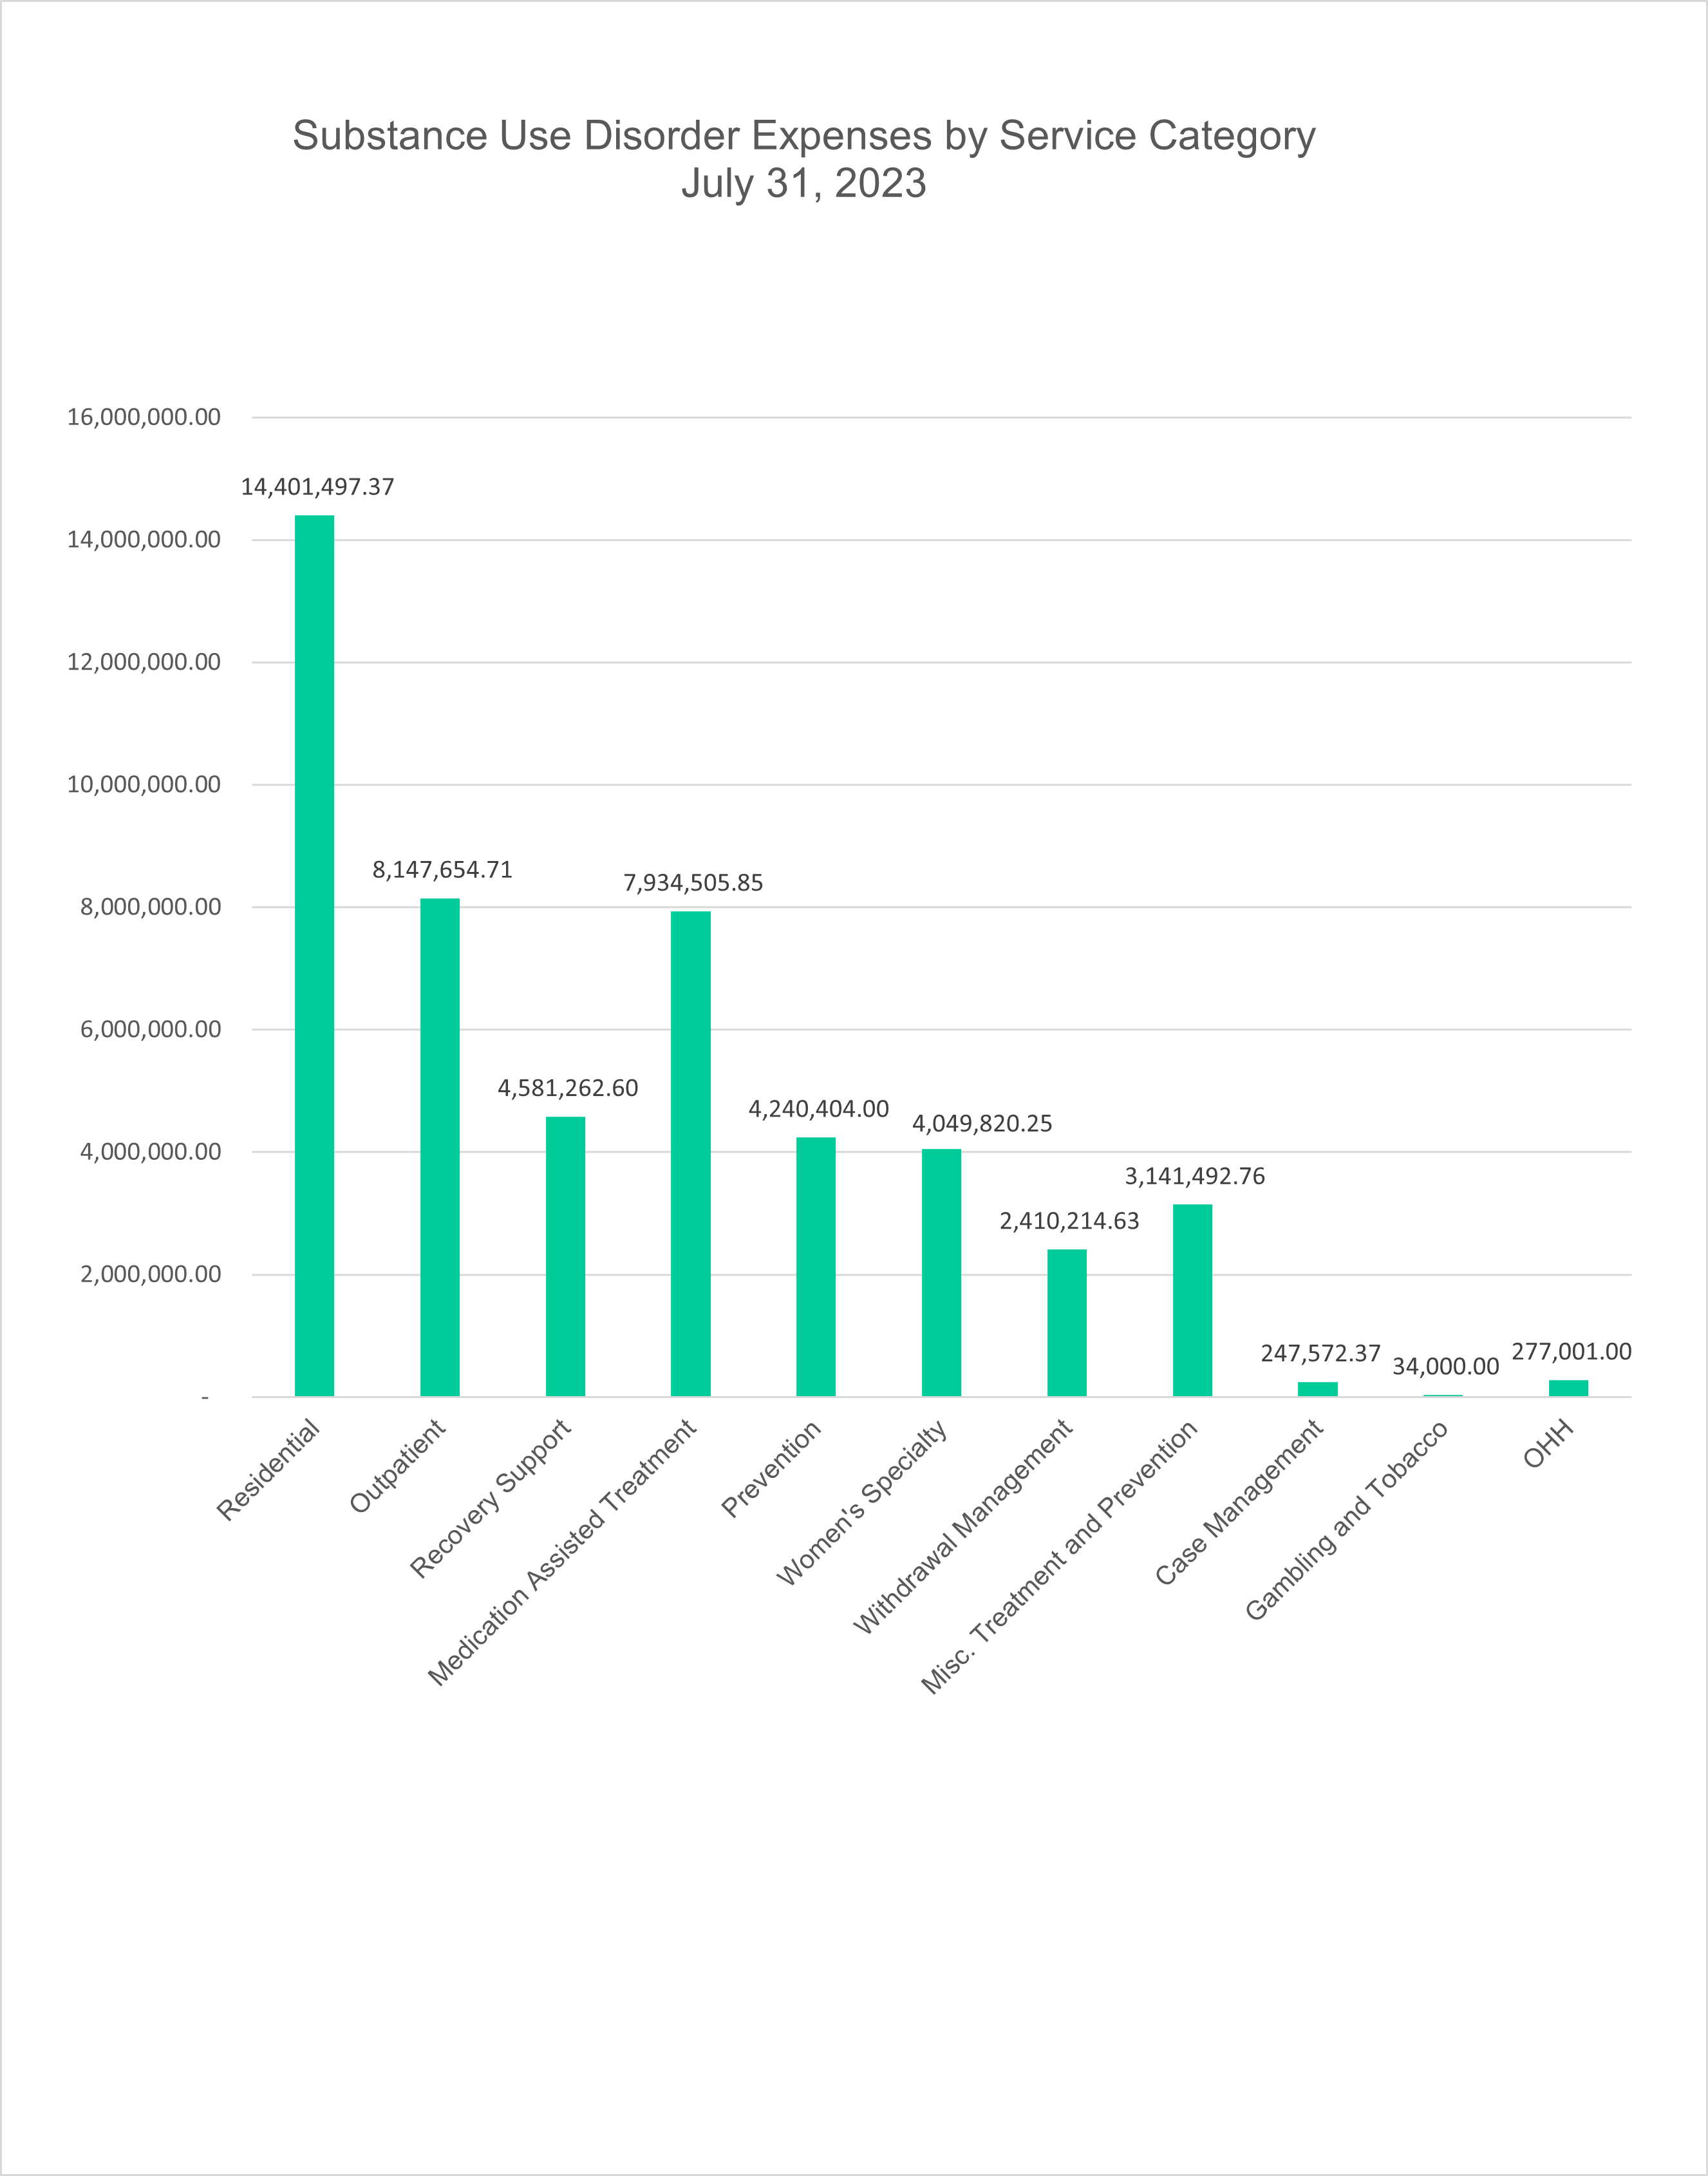 This graph represents funds spent for Substance Use Disorder (SUD) treatment and prevention services by category.